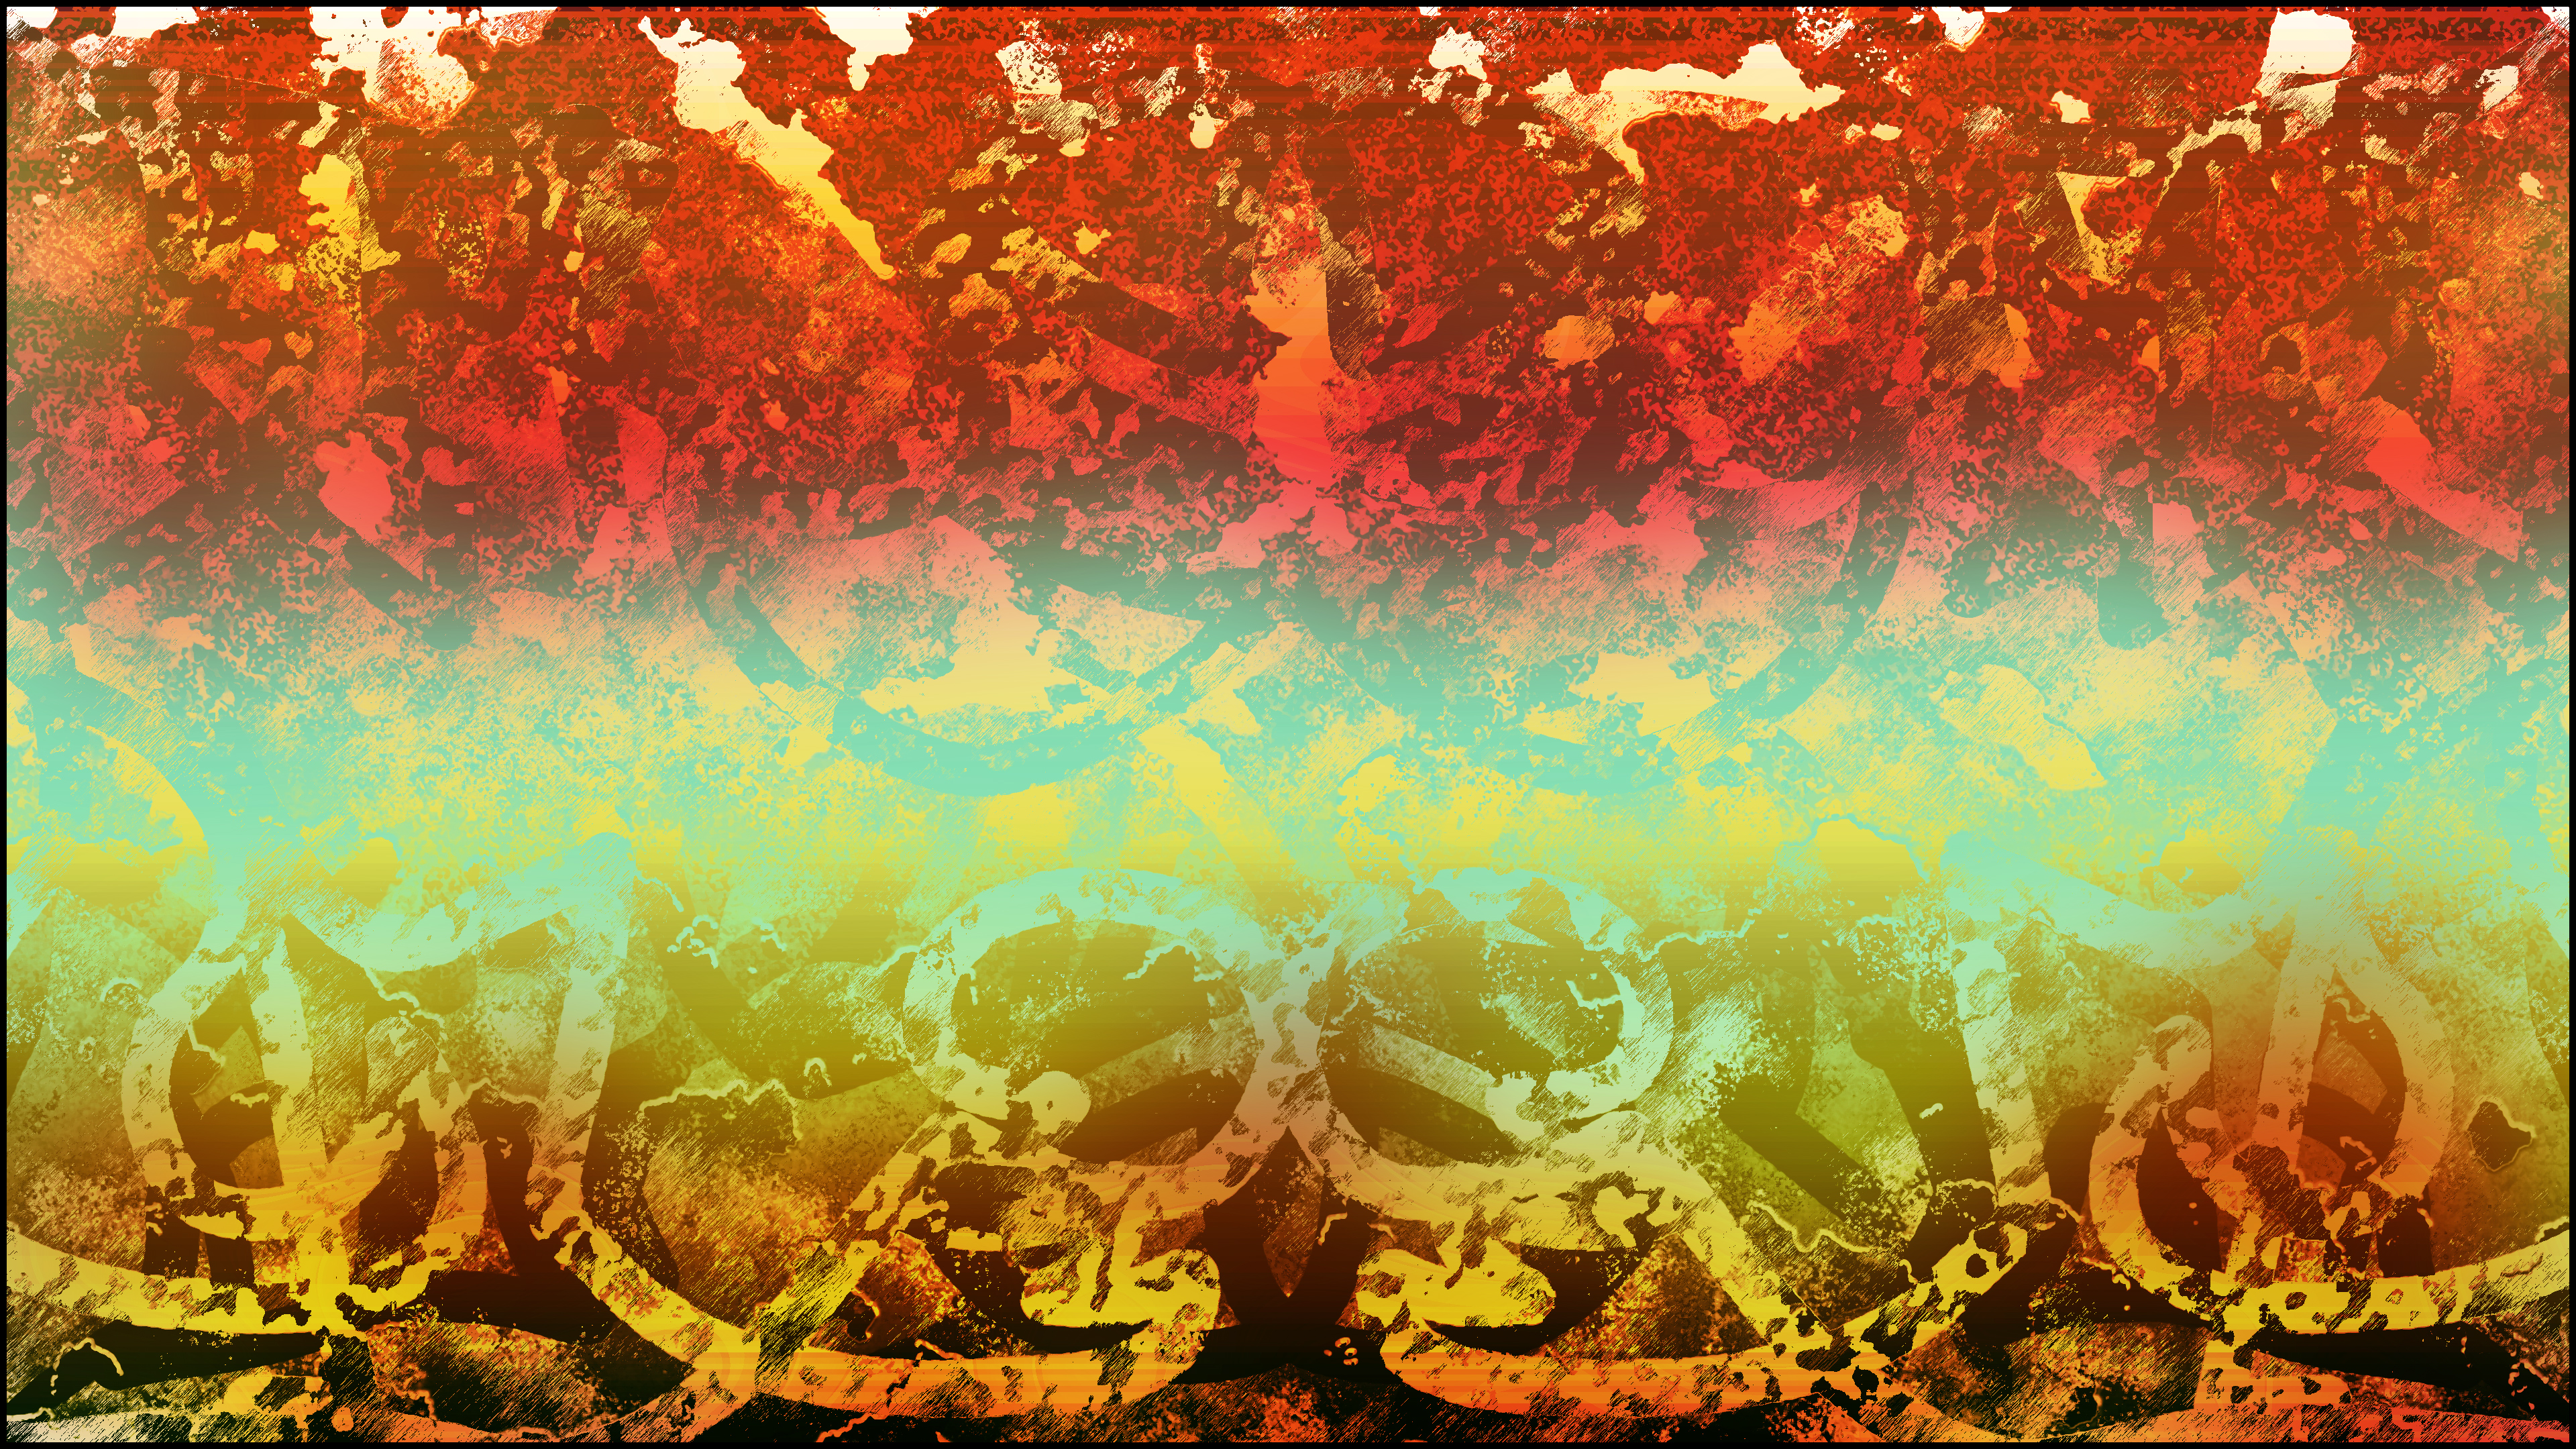 Abstract Trippy Digital Art Colorful 3840x2160